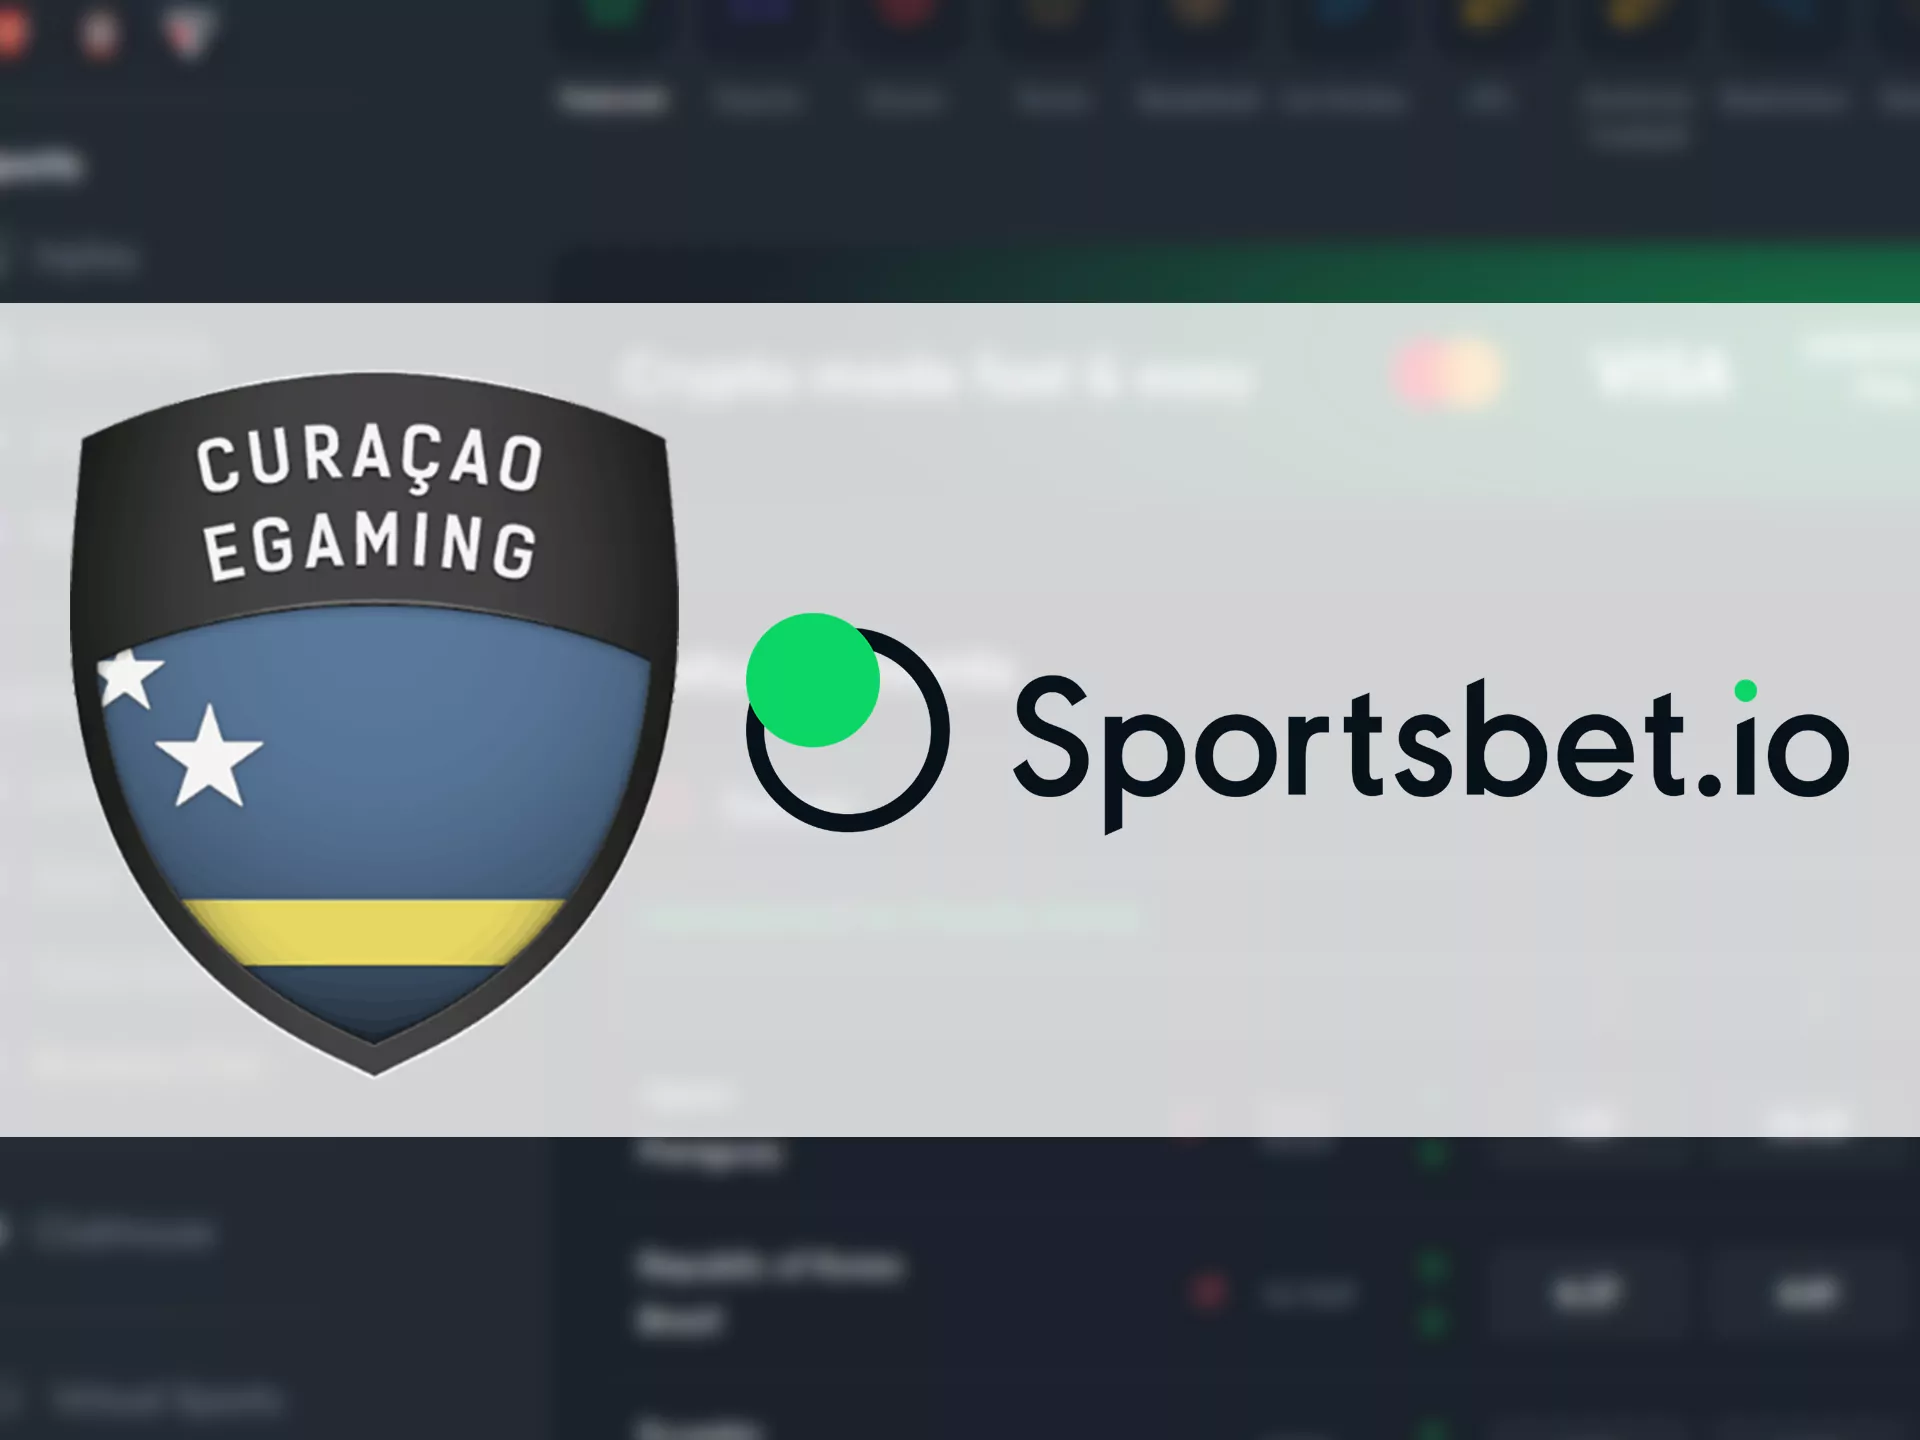 Sportsbet has a license from the Curacao eGaming Commision.